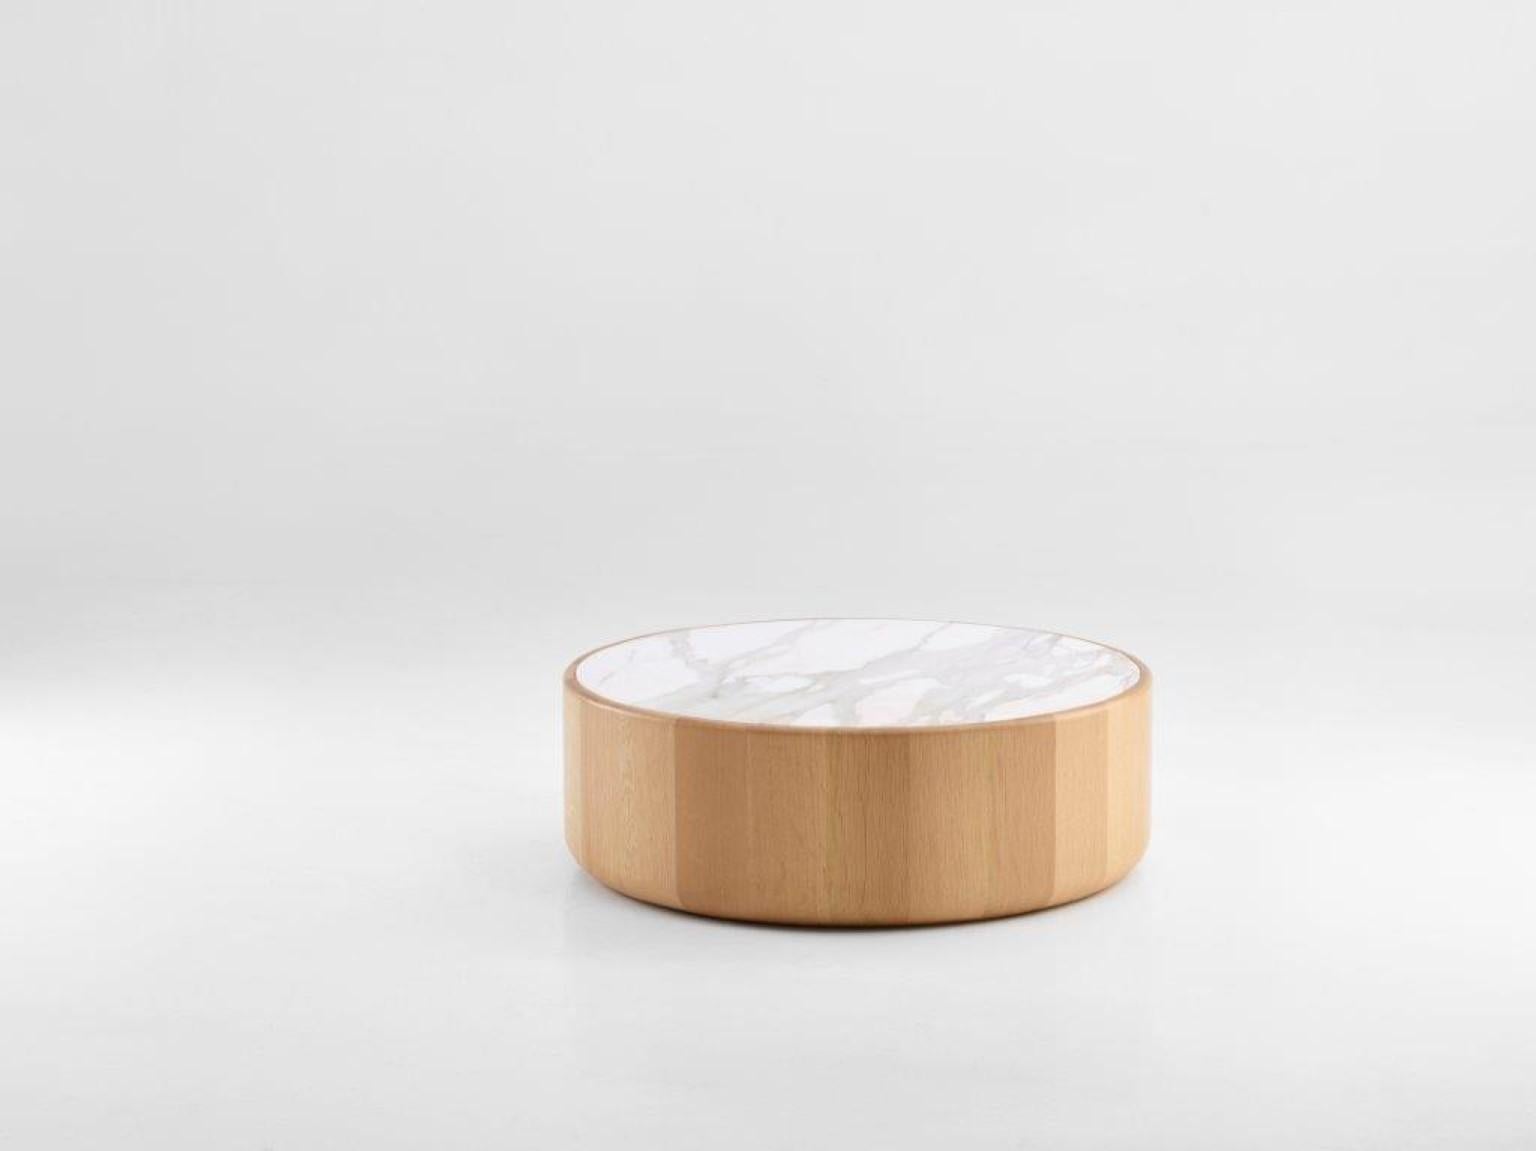 Levels low table Dan Yeffet & Lucie Koldova
Dimensions: Ø75 x 25 cm
Materials: Solid oak, natural oiled & oak tainted black.
Inlays: glass (4mm), mat black/white or marble (20mm)


Set of 3 nesting tables of different height.
The solid